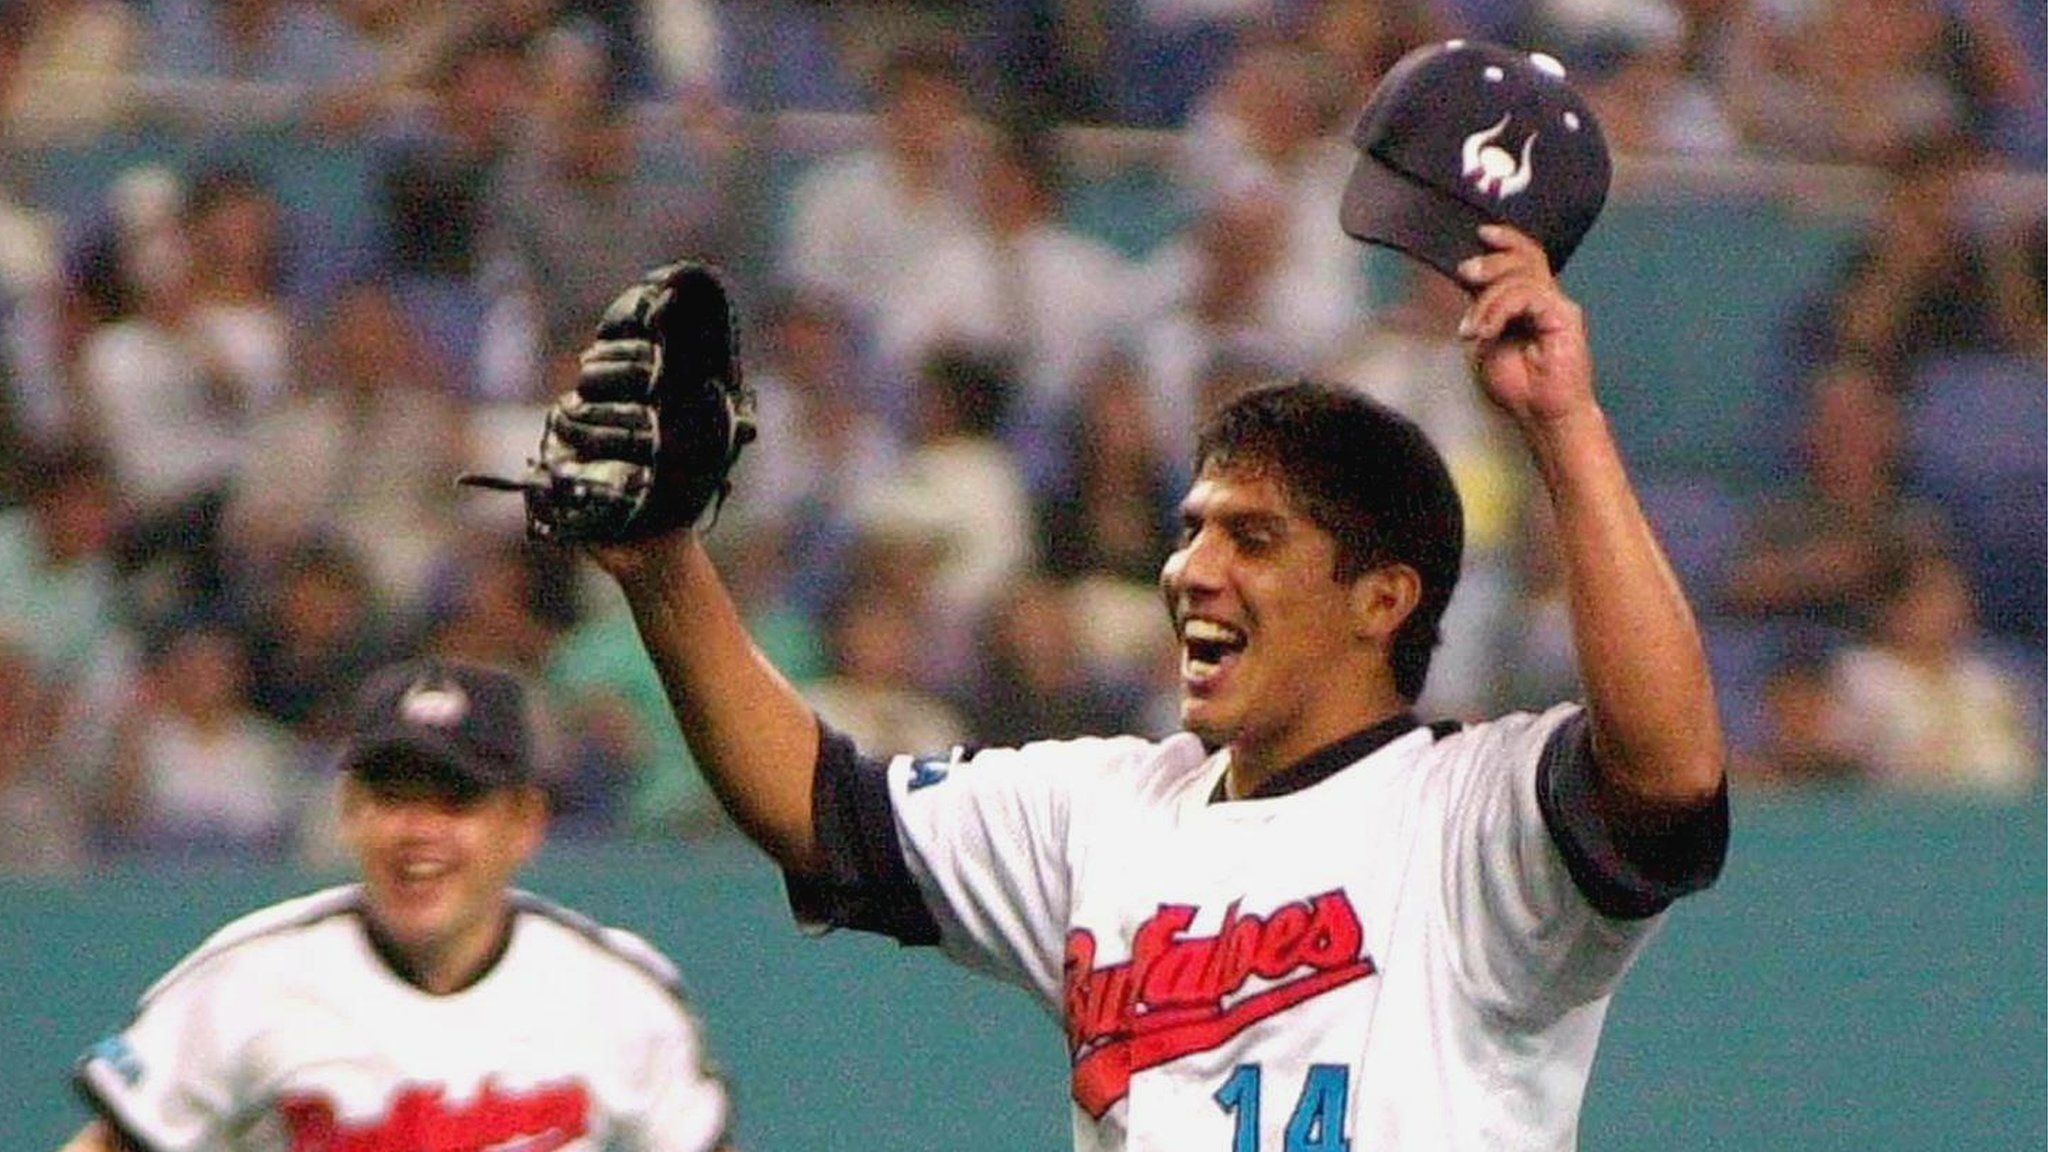 Mexican pitcher Narciso Elvira of the Kintetsu Buffaloes throws his hands in the air to celebrate after he pitched a no-hit, no run game against the Seibu Lions during a Pacific League professional baseball game at the Osaka Dome, in western Japan 20 June 2000